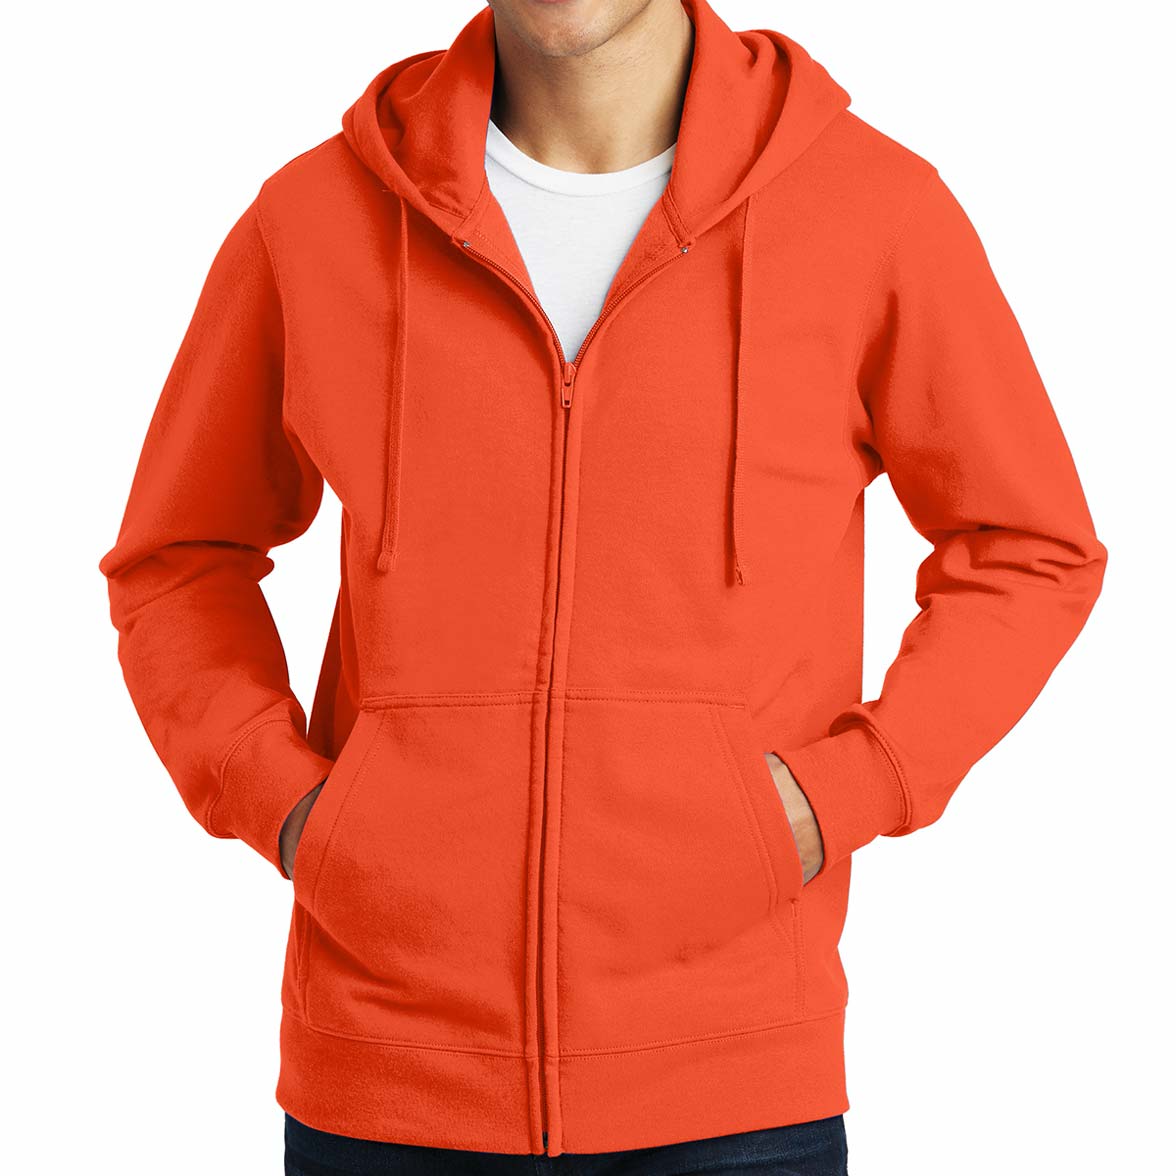 Adult Zip-Up Hoodie - You Choose Any Design - Phunky Threads